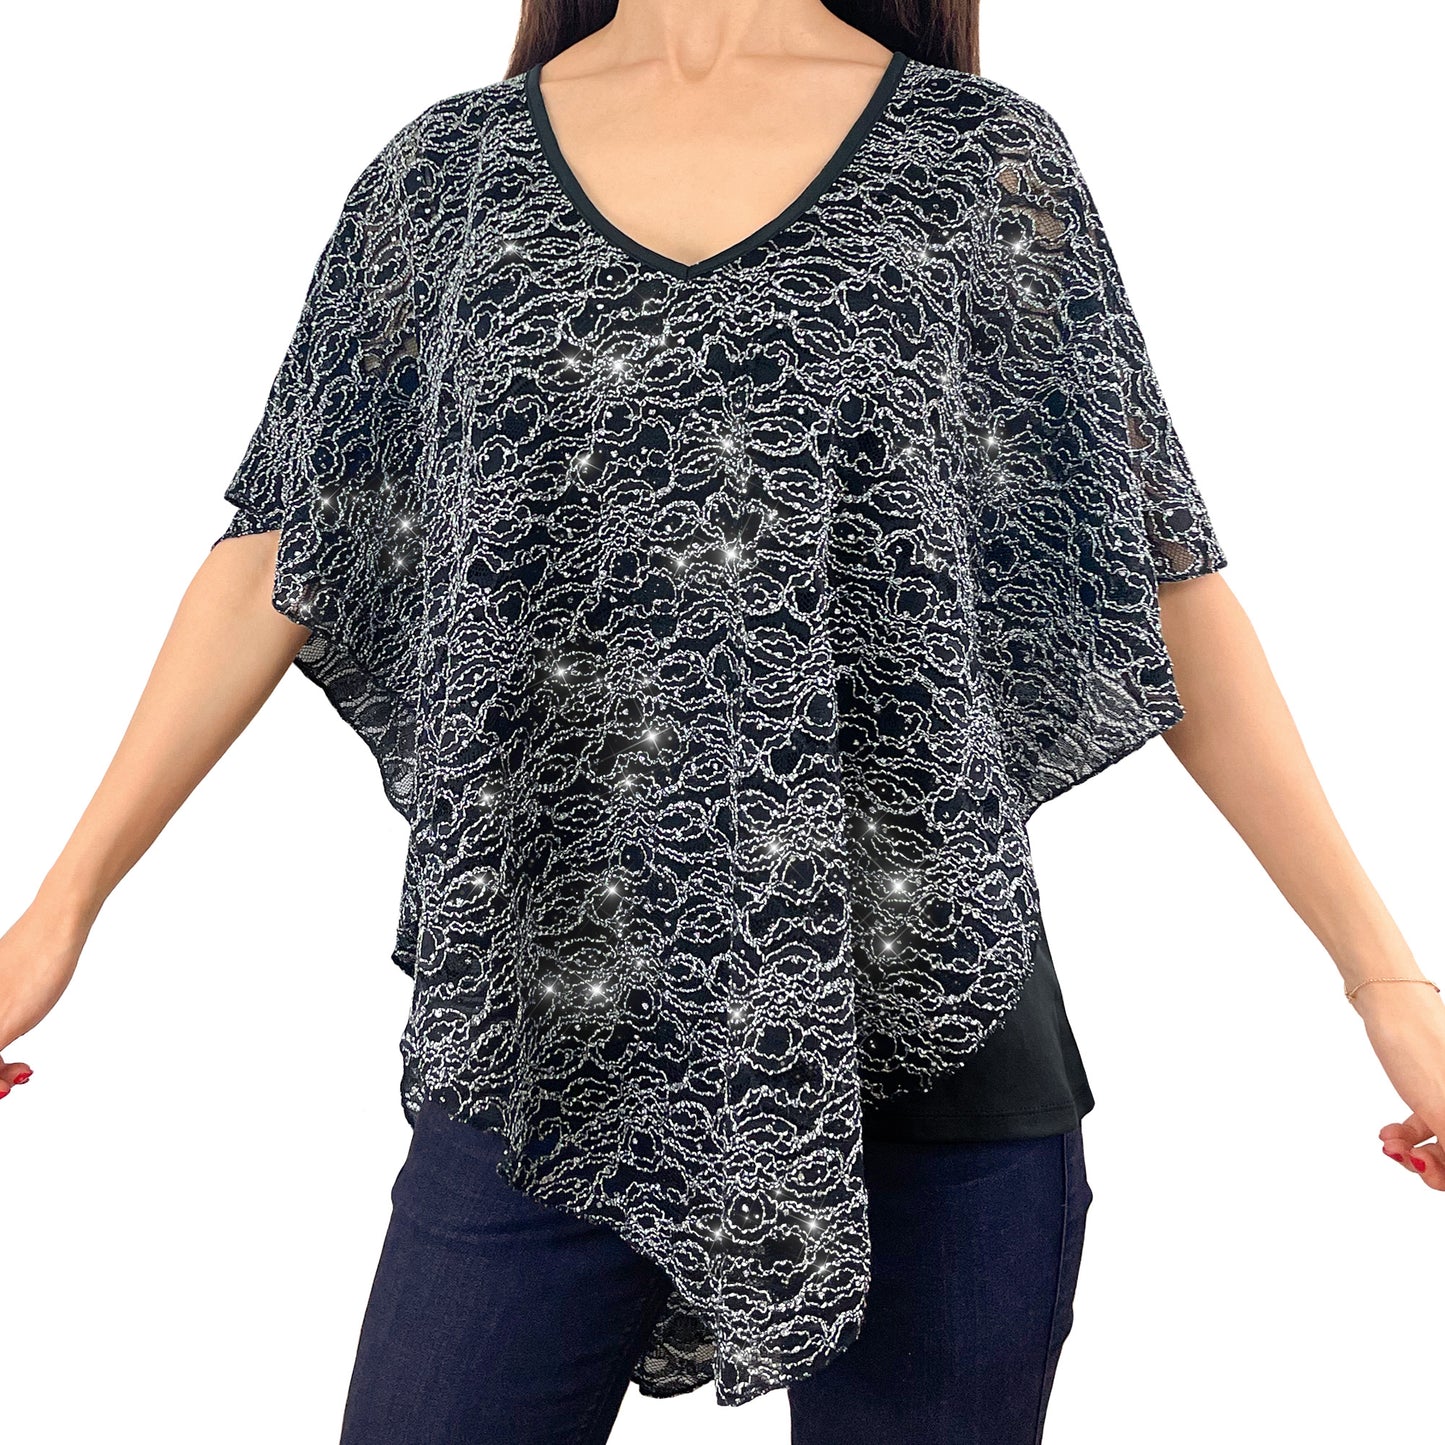 Sparkly Silver Glitter/Embroidery Black Floral Lace V-Neck 3/4 Sleeve Poncho